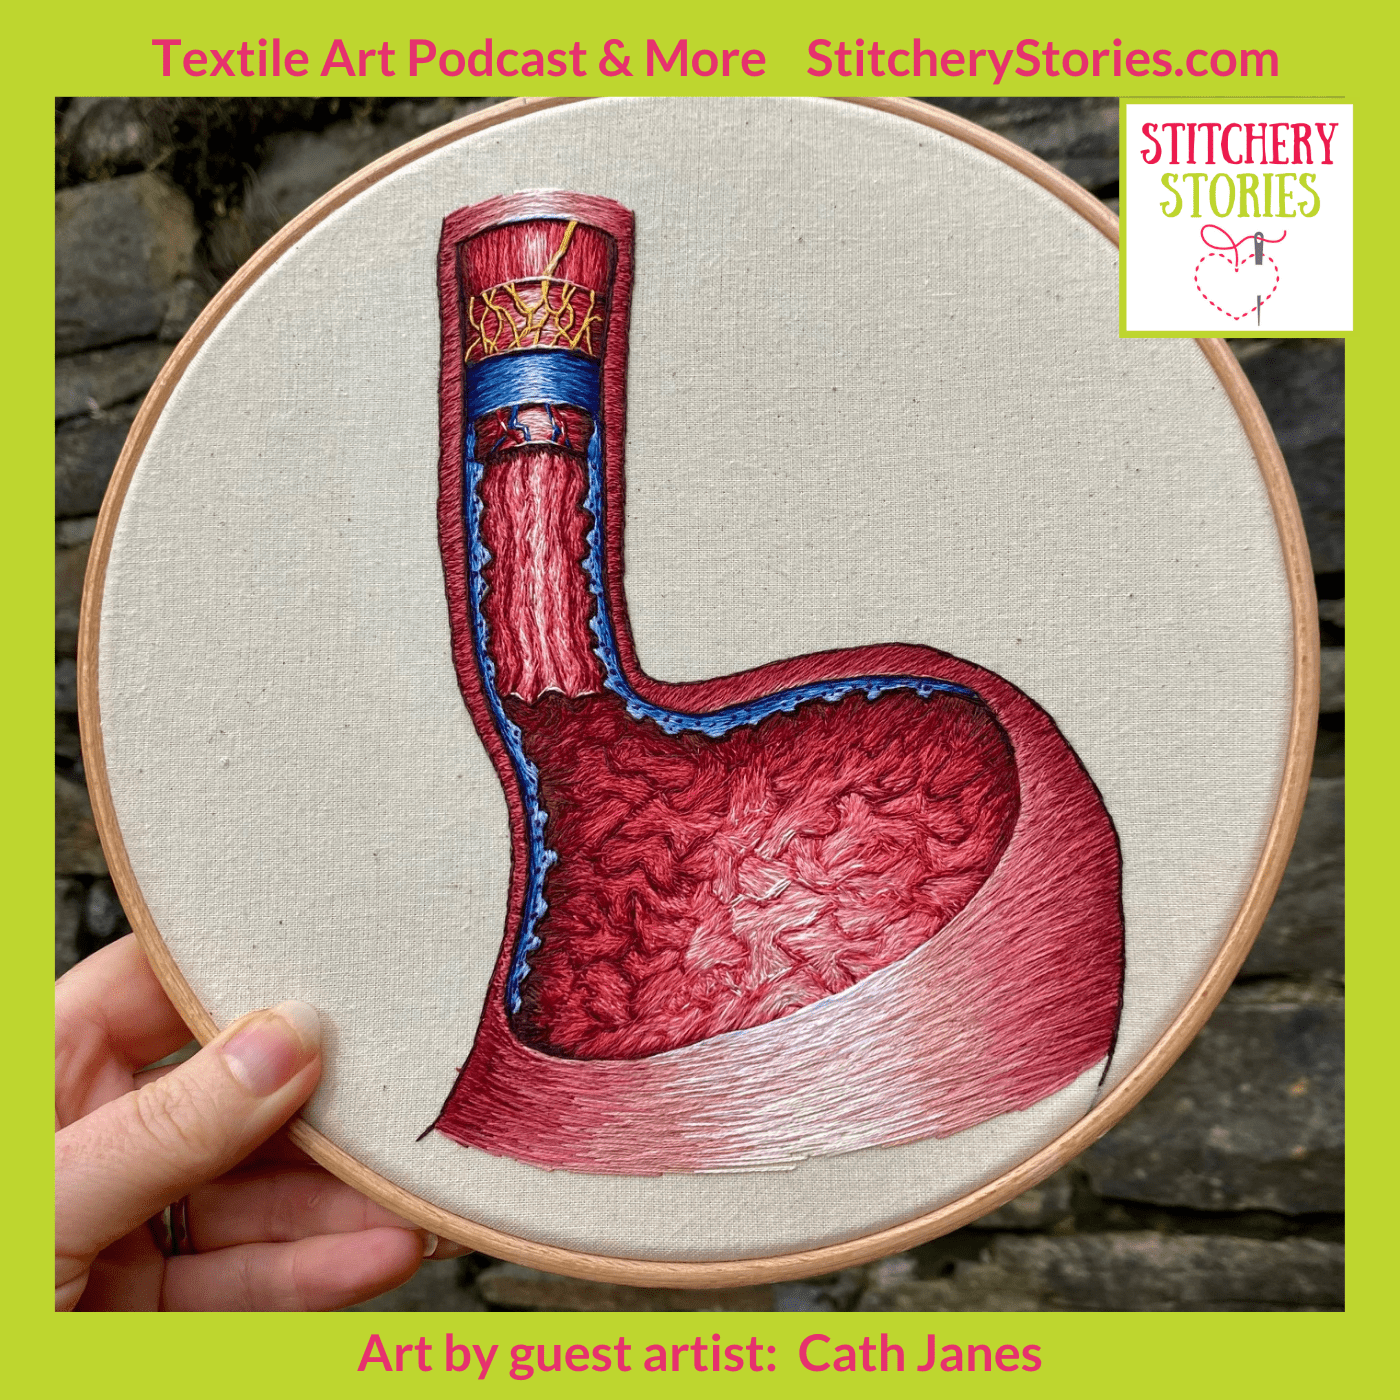 Esophagus 23 by cath janes Stitchery Stories podcast